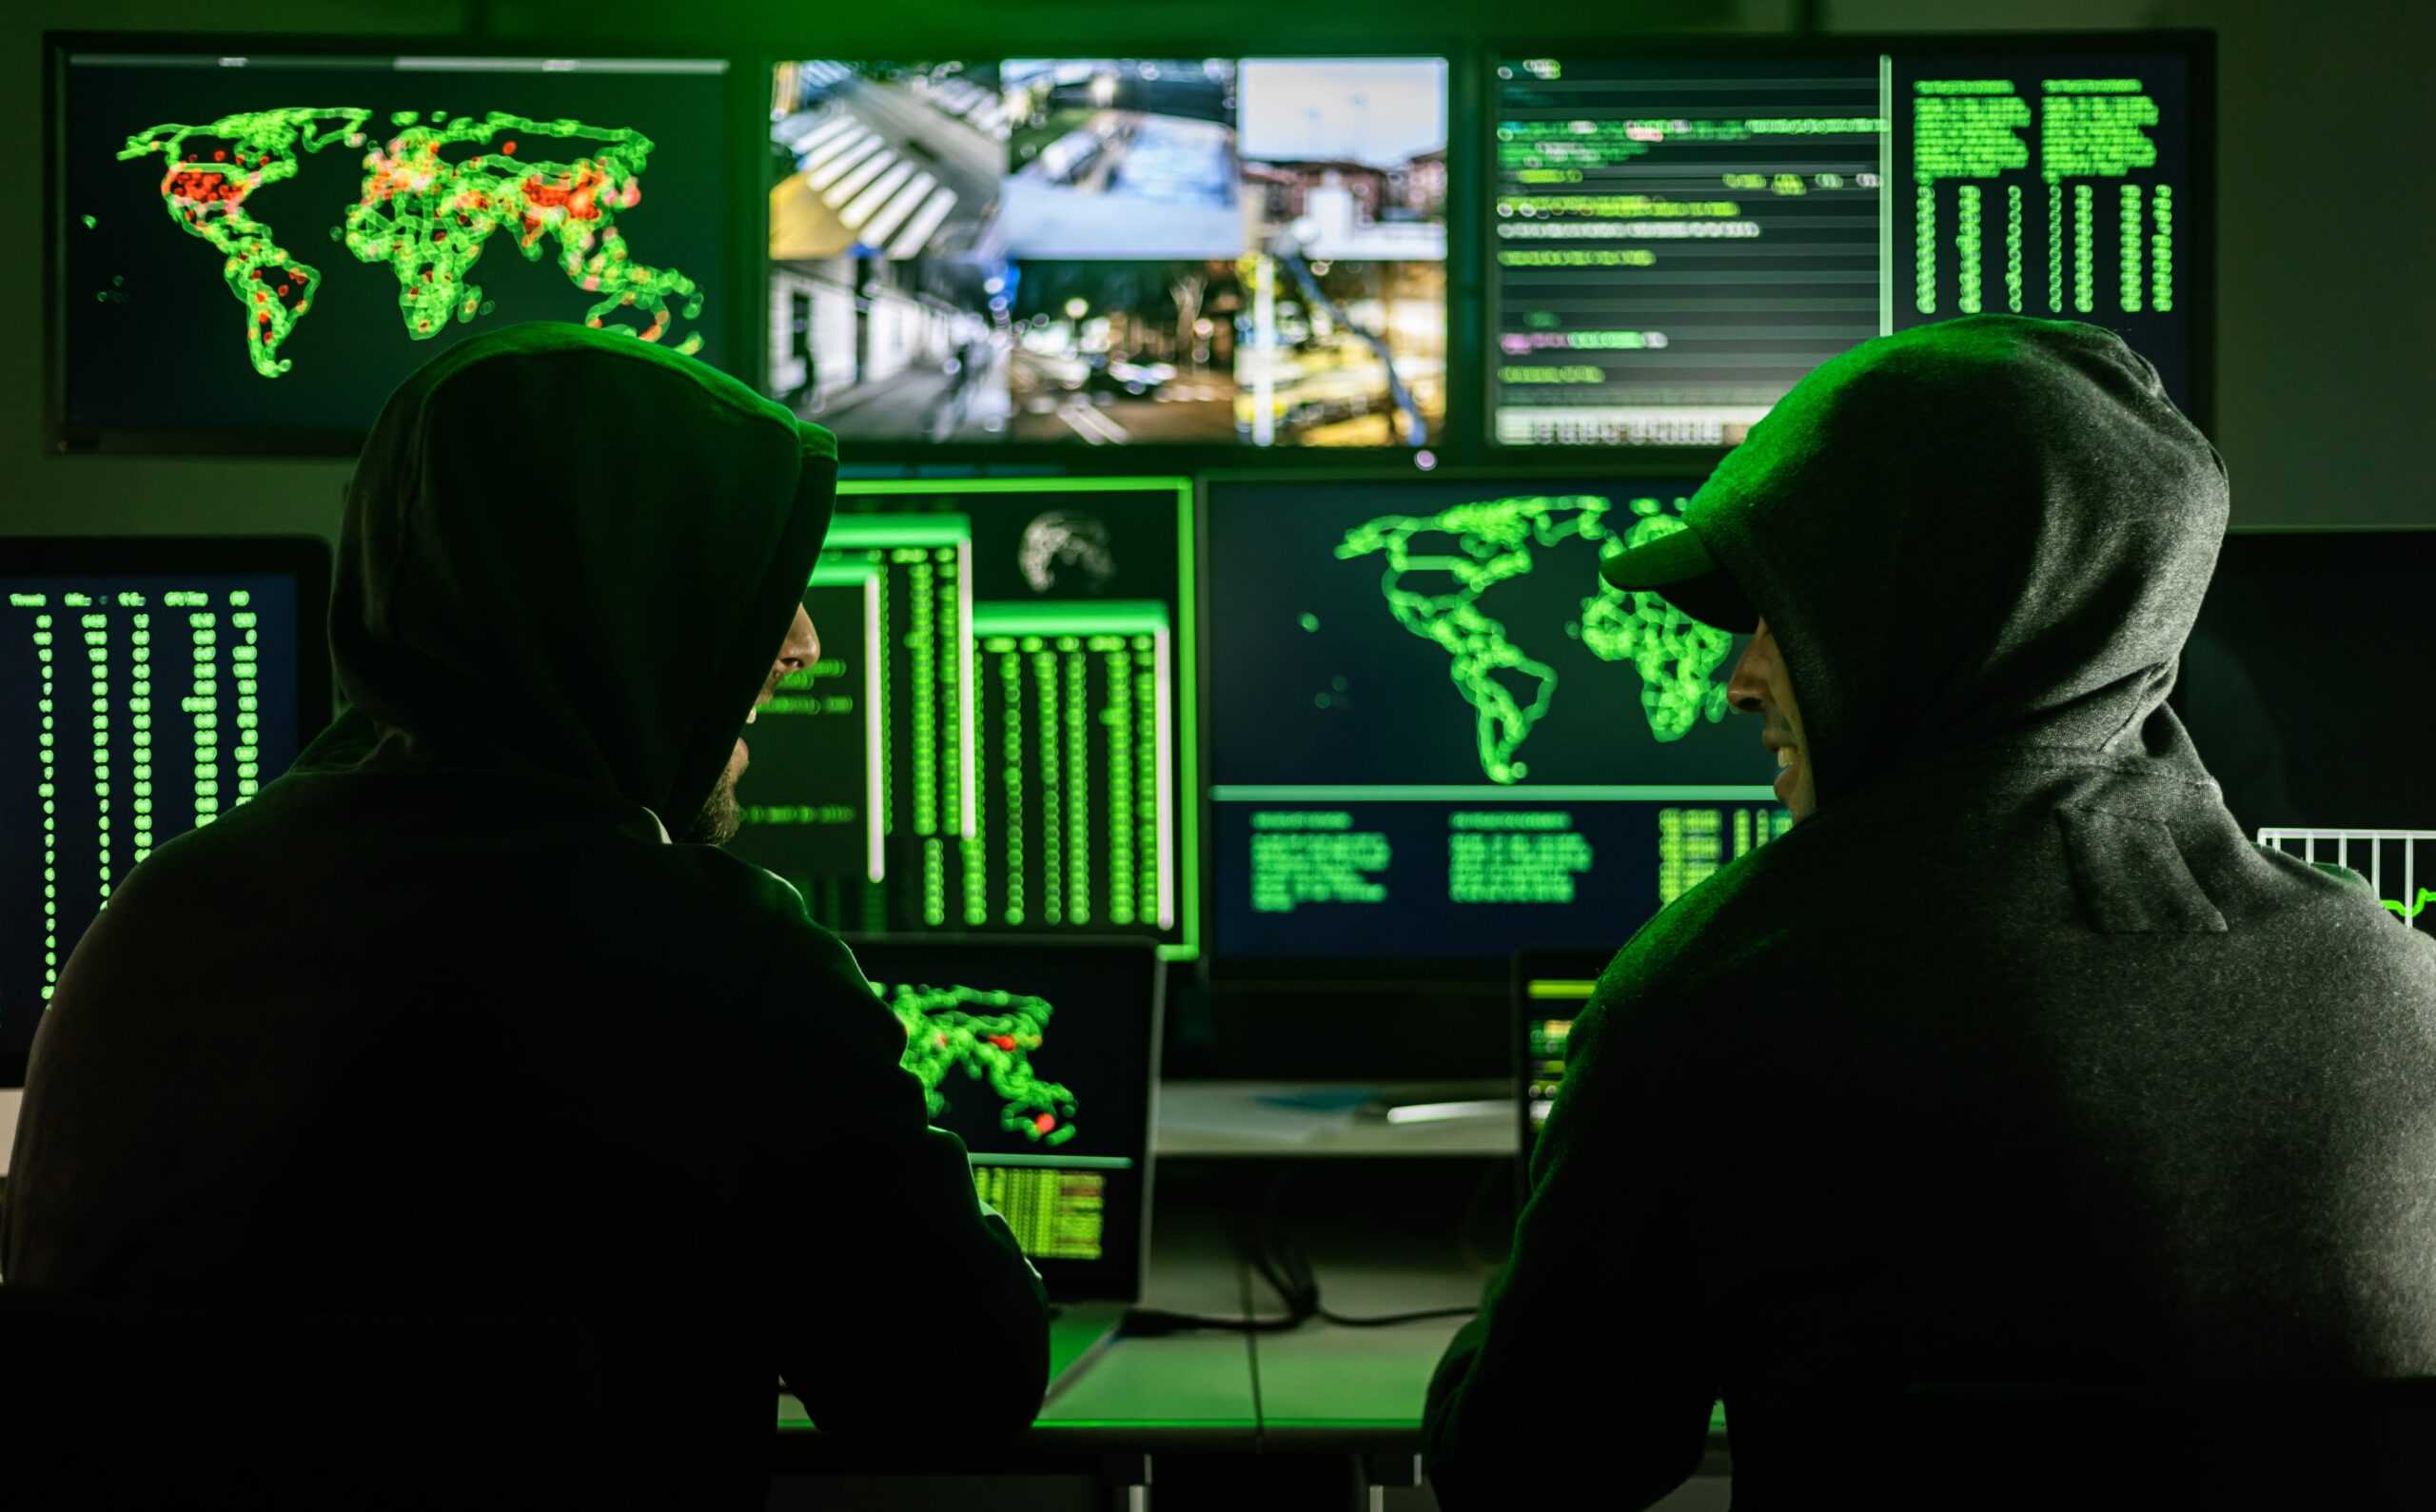 Two people with black hoodies are sitting in a dark room in front of a huge screen that shows maps of the world and images of street corners and buildings.